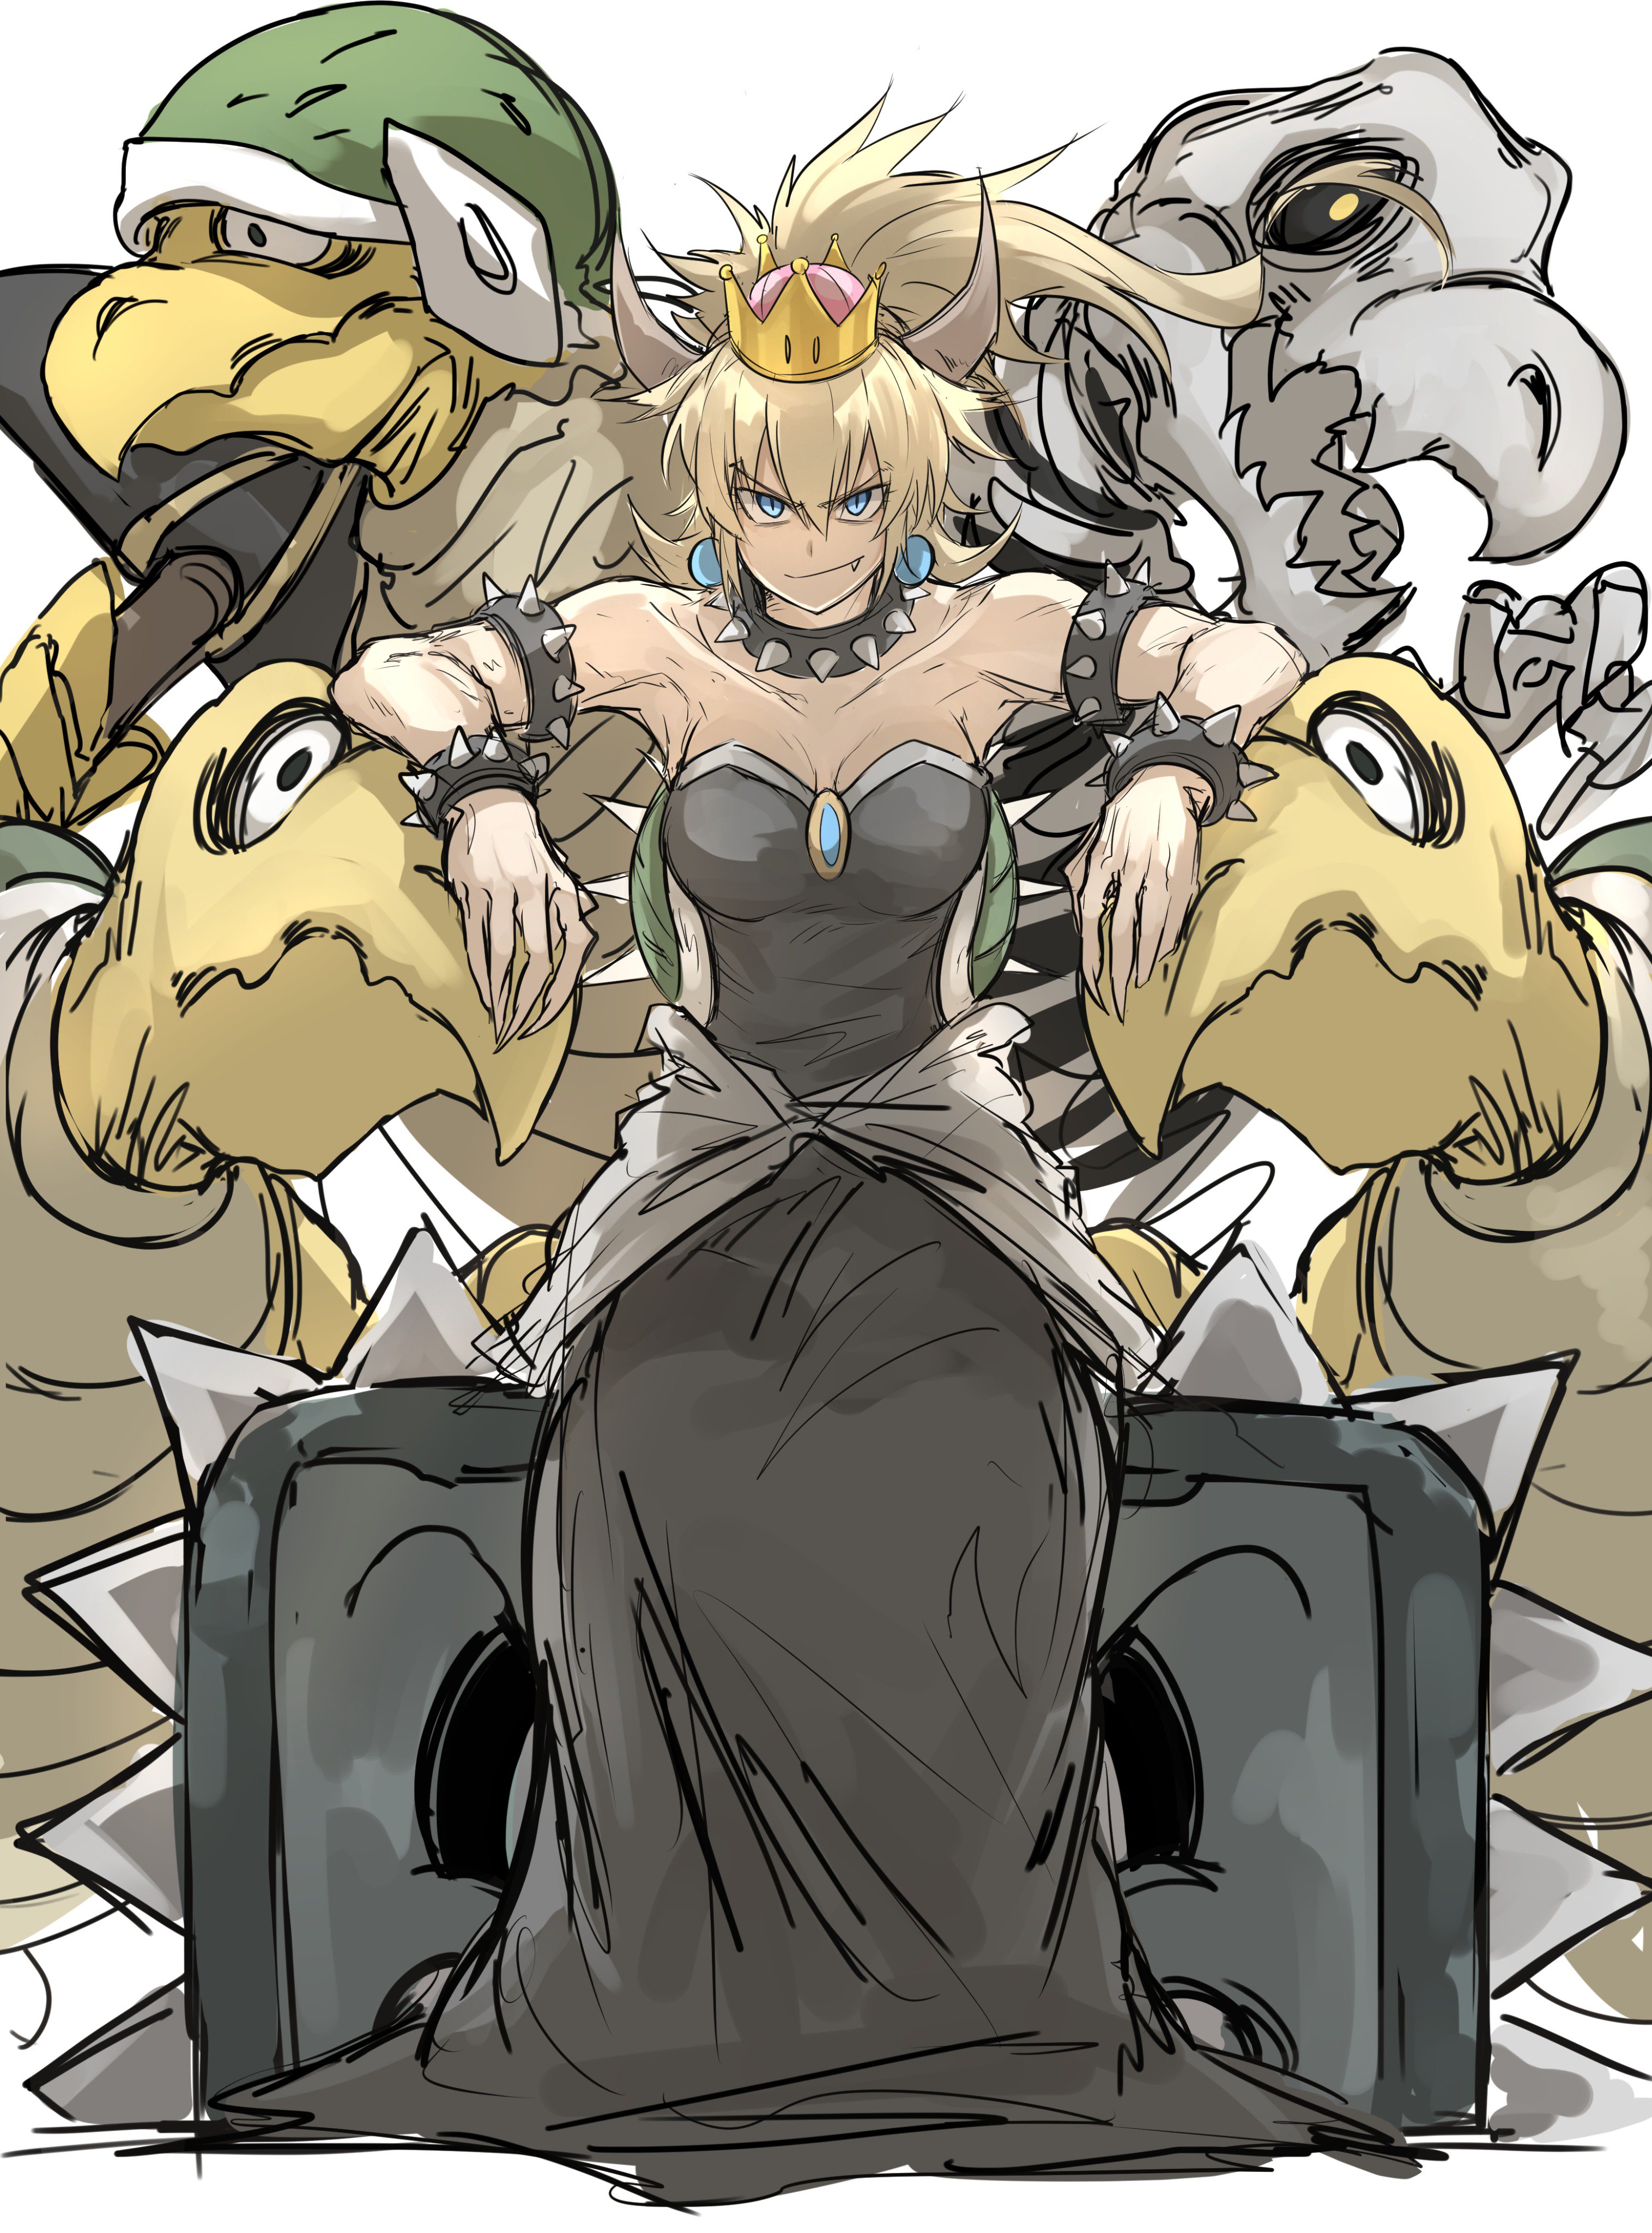 Bowsette looking mean resting her arms on some Koopa Troopas